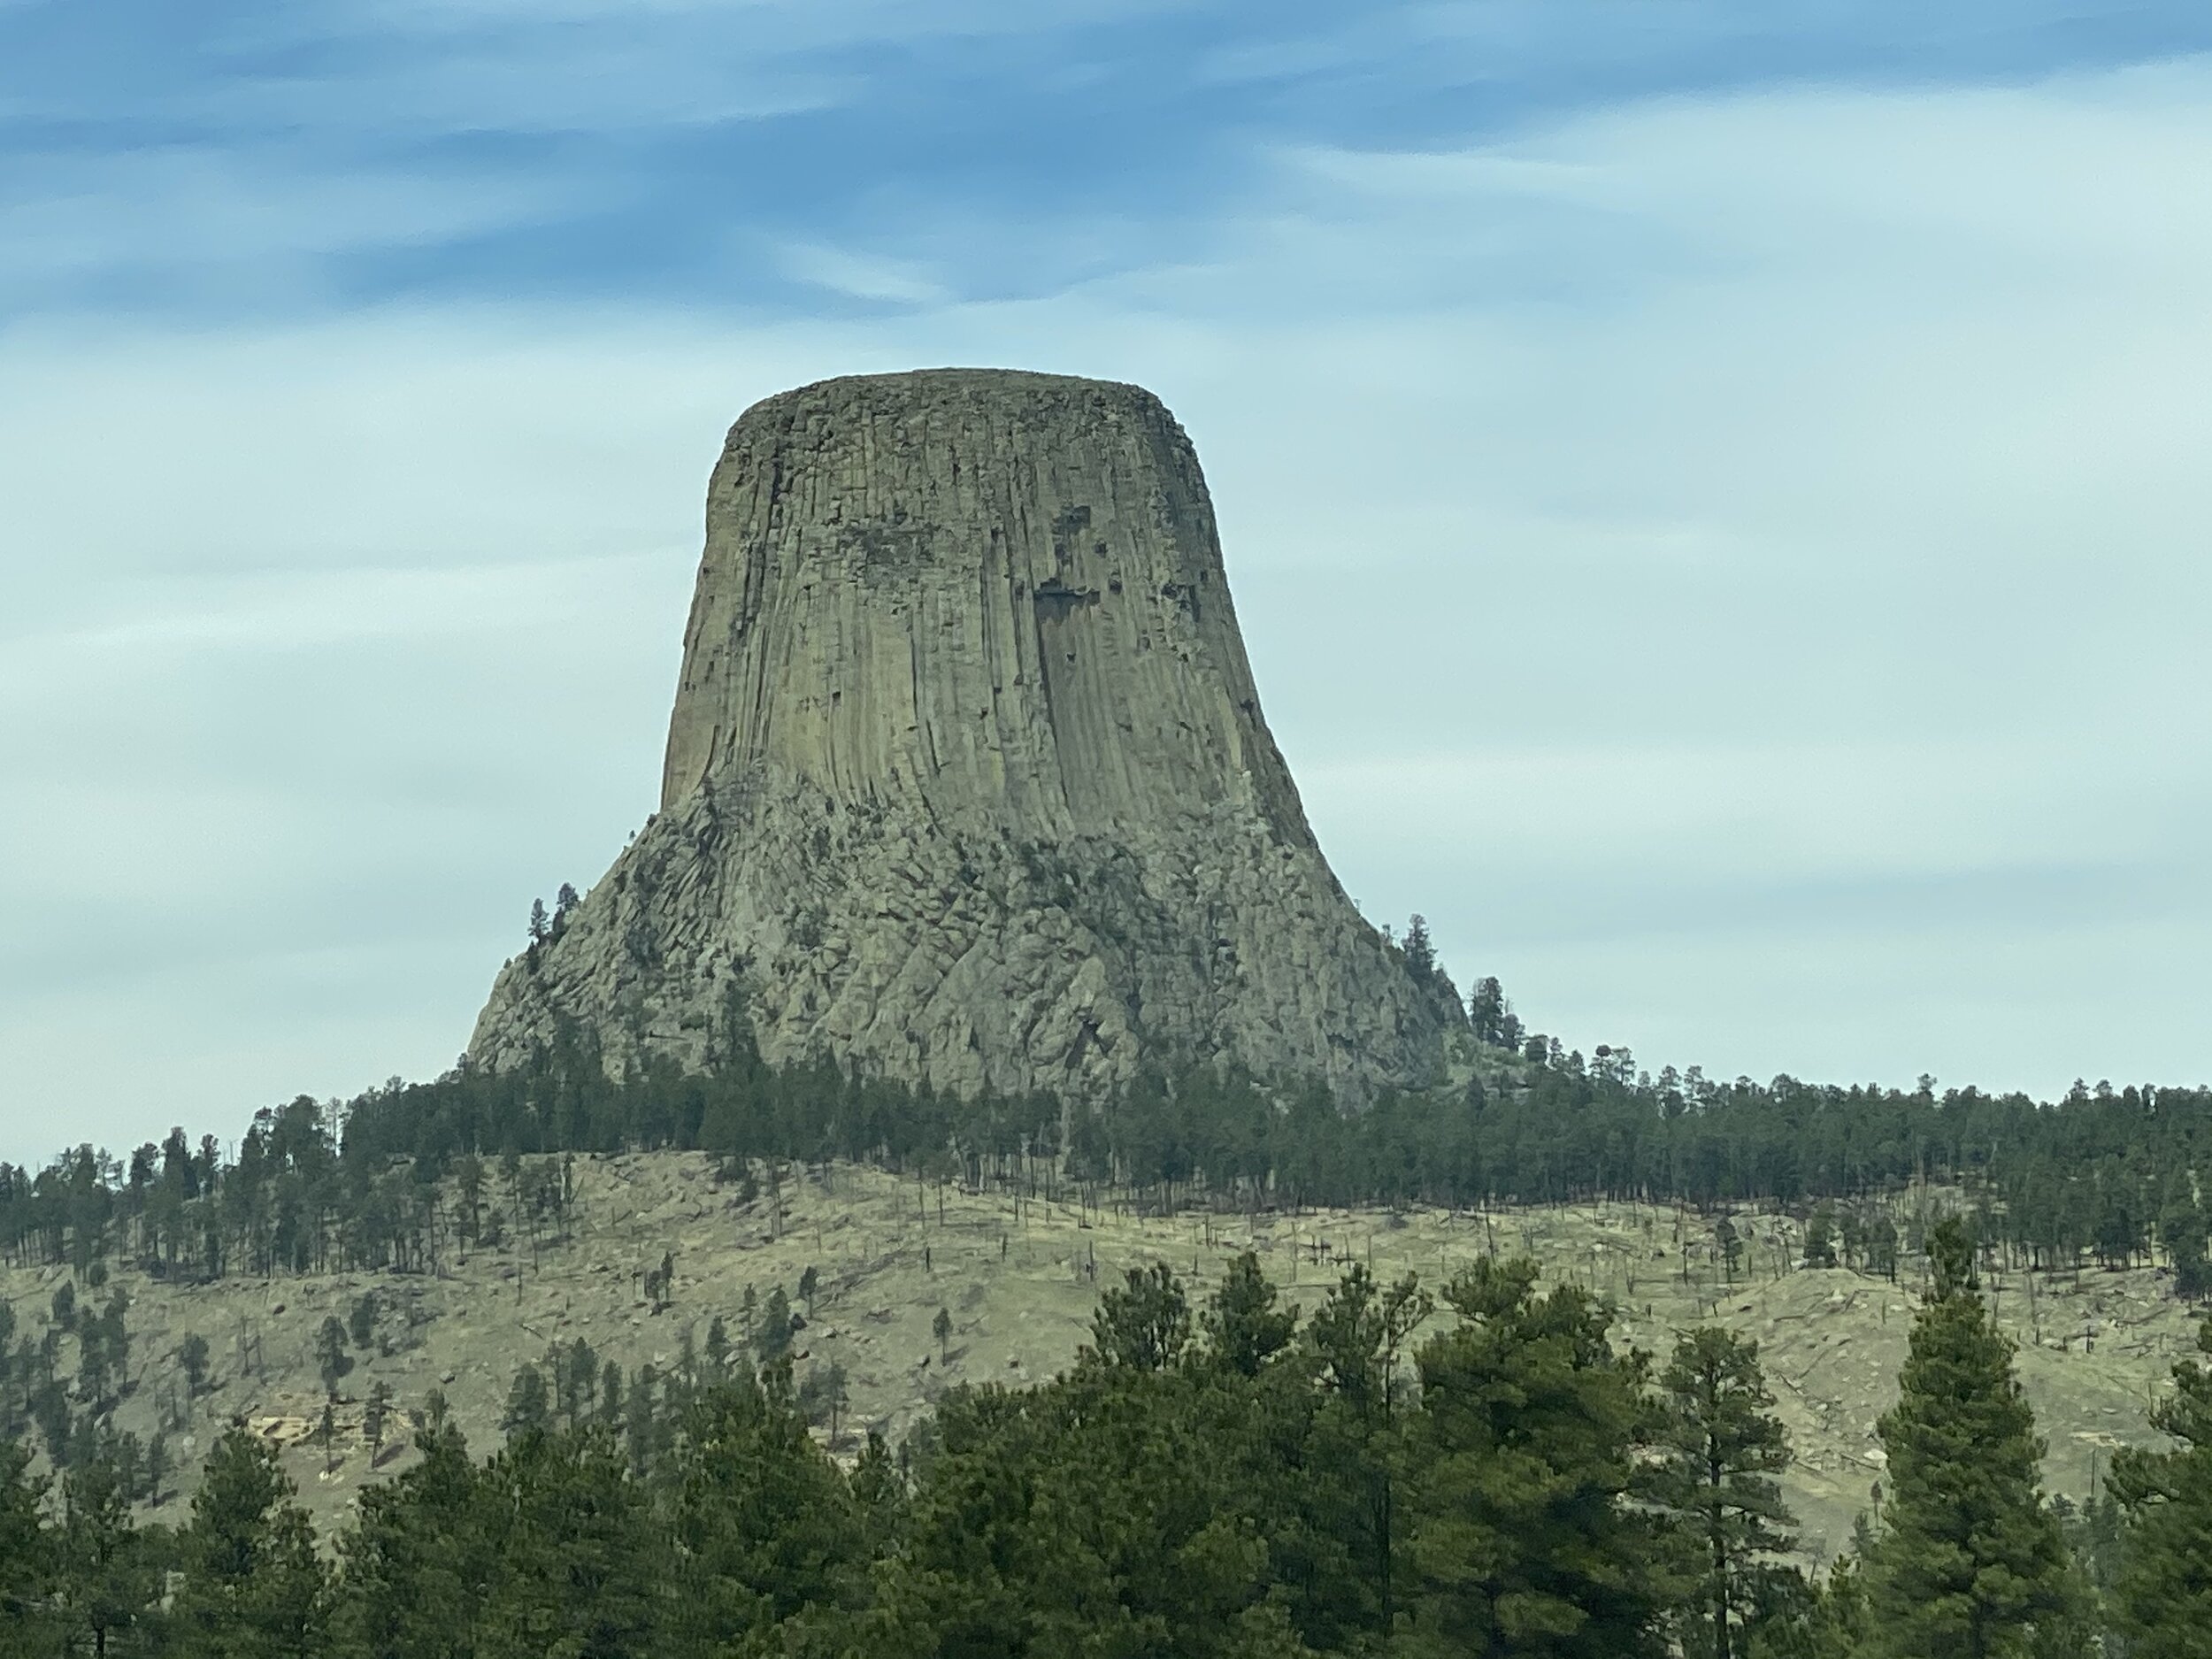 Strange and beautiful, Devil’s Tower National Monument.  Photo by Karen Boudreaux, May 28, 2021